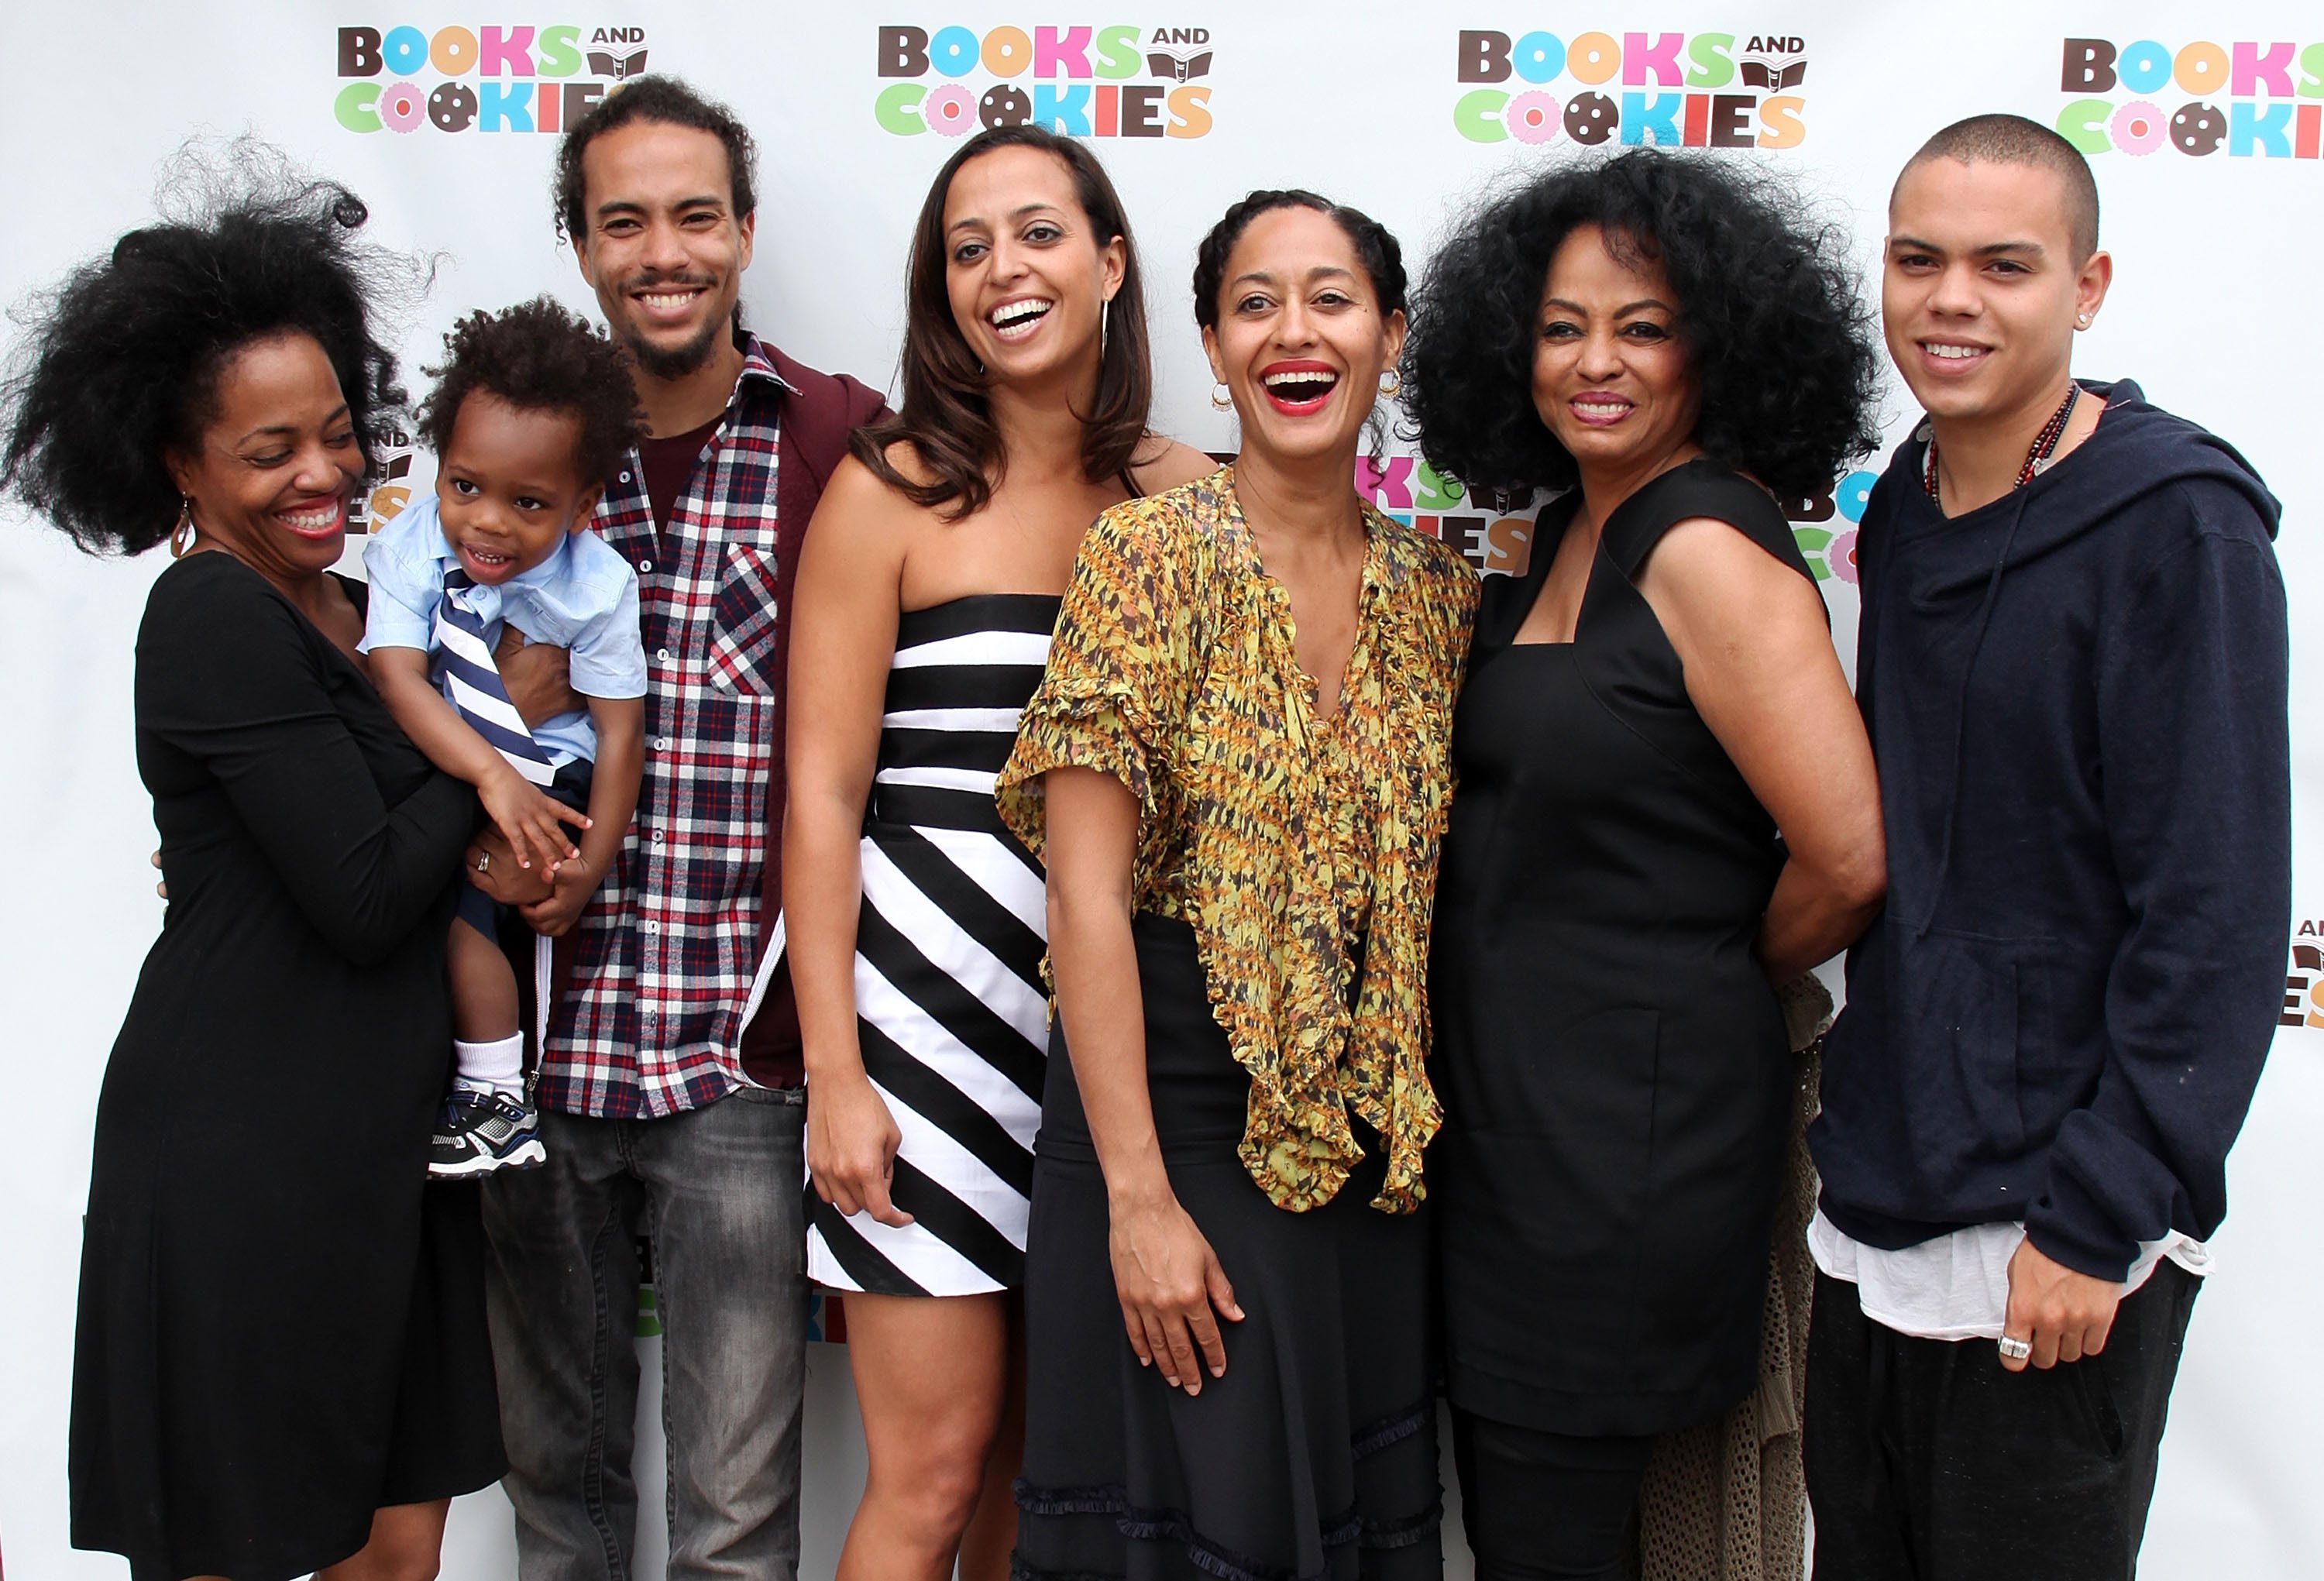 Rhonda Ross Kendrick, Raif Kendrick, Ross Naess, Chudney Ross, Tracee Ellis Ross, Diana Ross and Evan Ross attend the grand opening of Books & Cookies on May 14, 2011 in Santa Monica, California | Photo: Getty Images